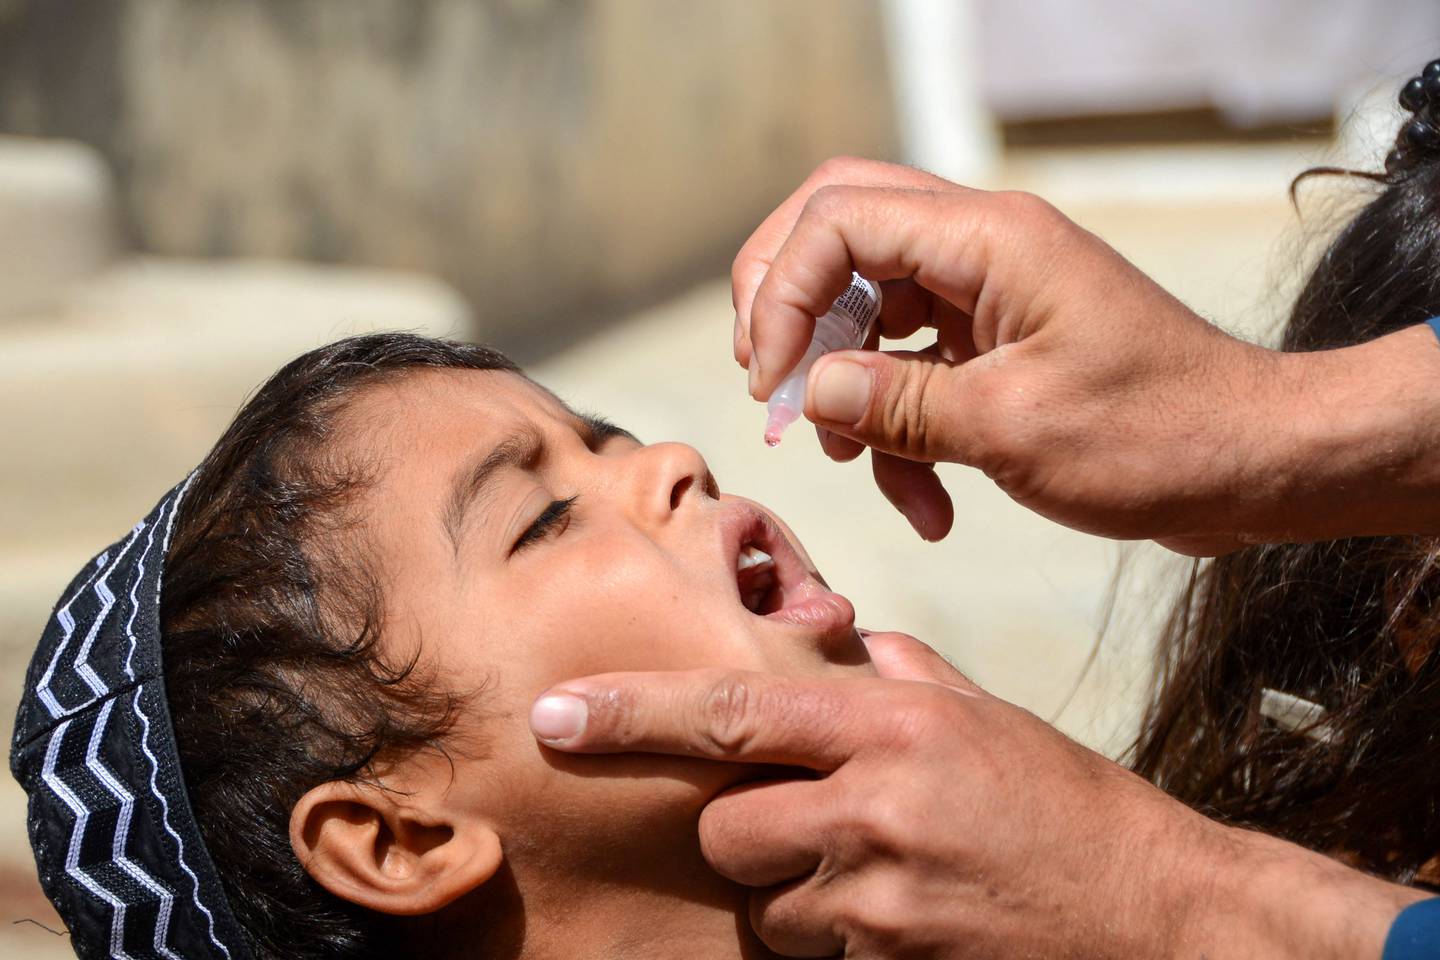 A health worker administers polio vaccine drops to a child on May 23 during a polio vaccination campaign in Kandahar, Afghanistan. AFP